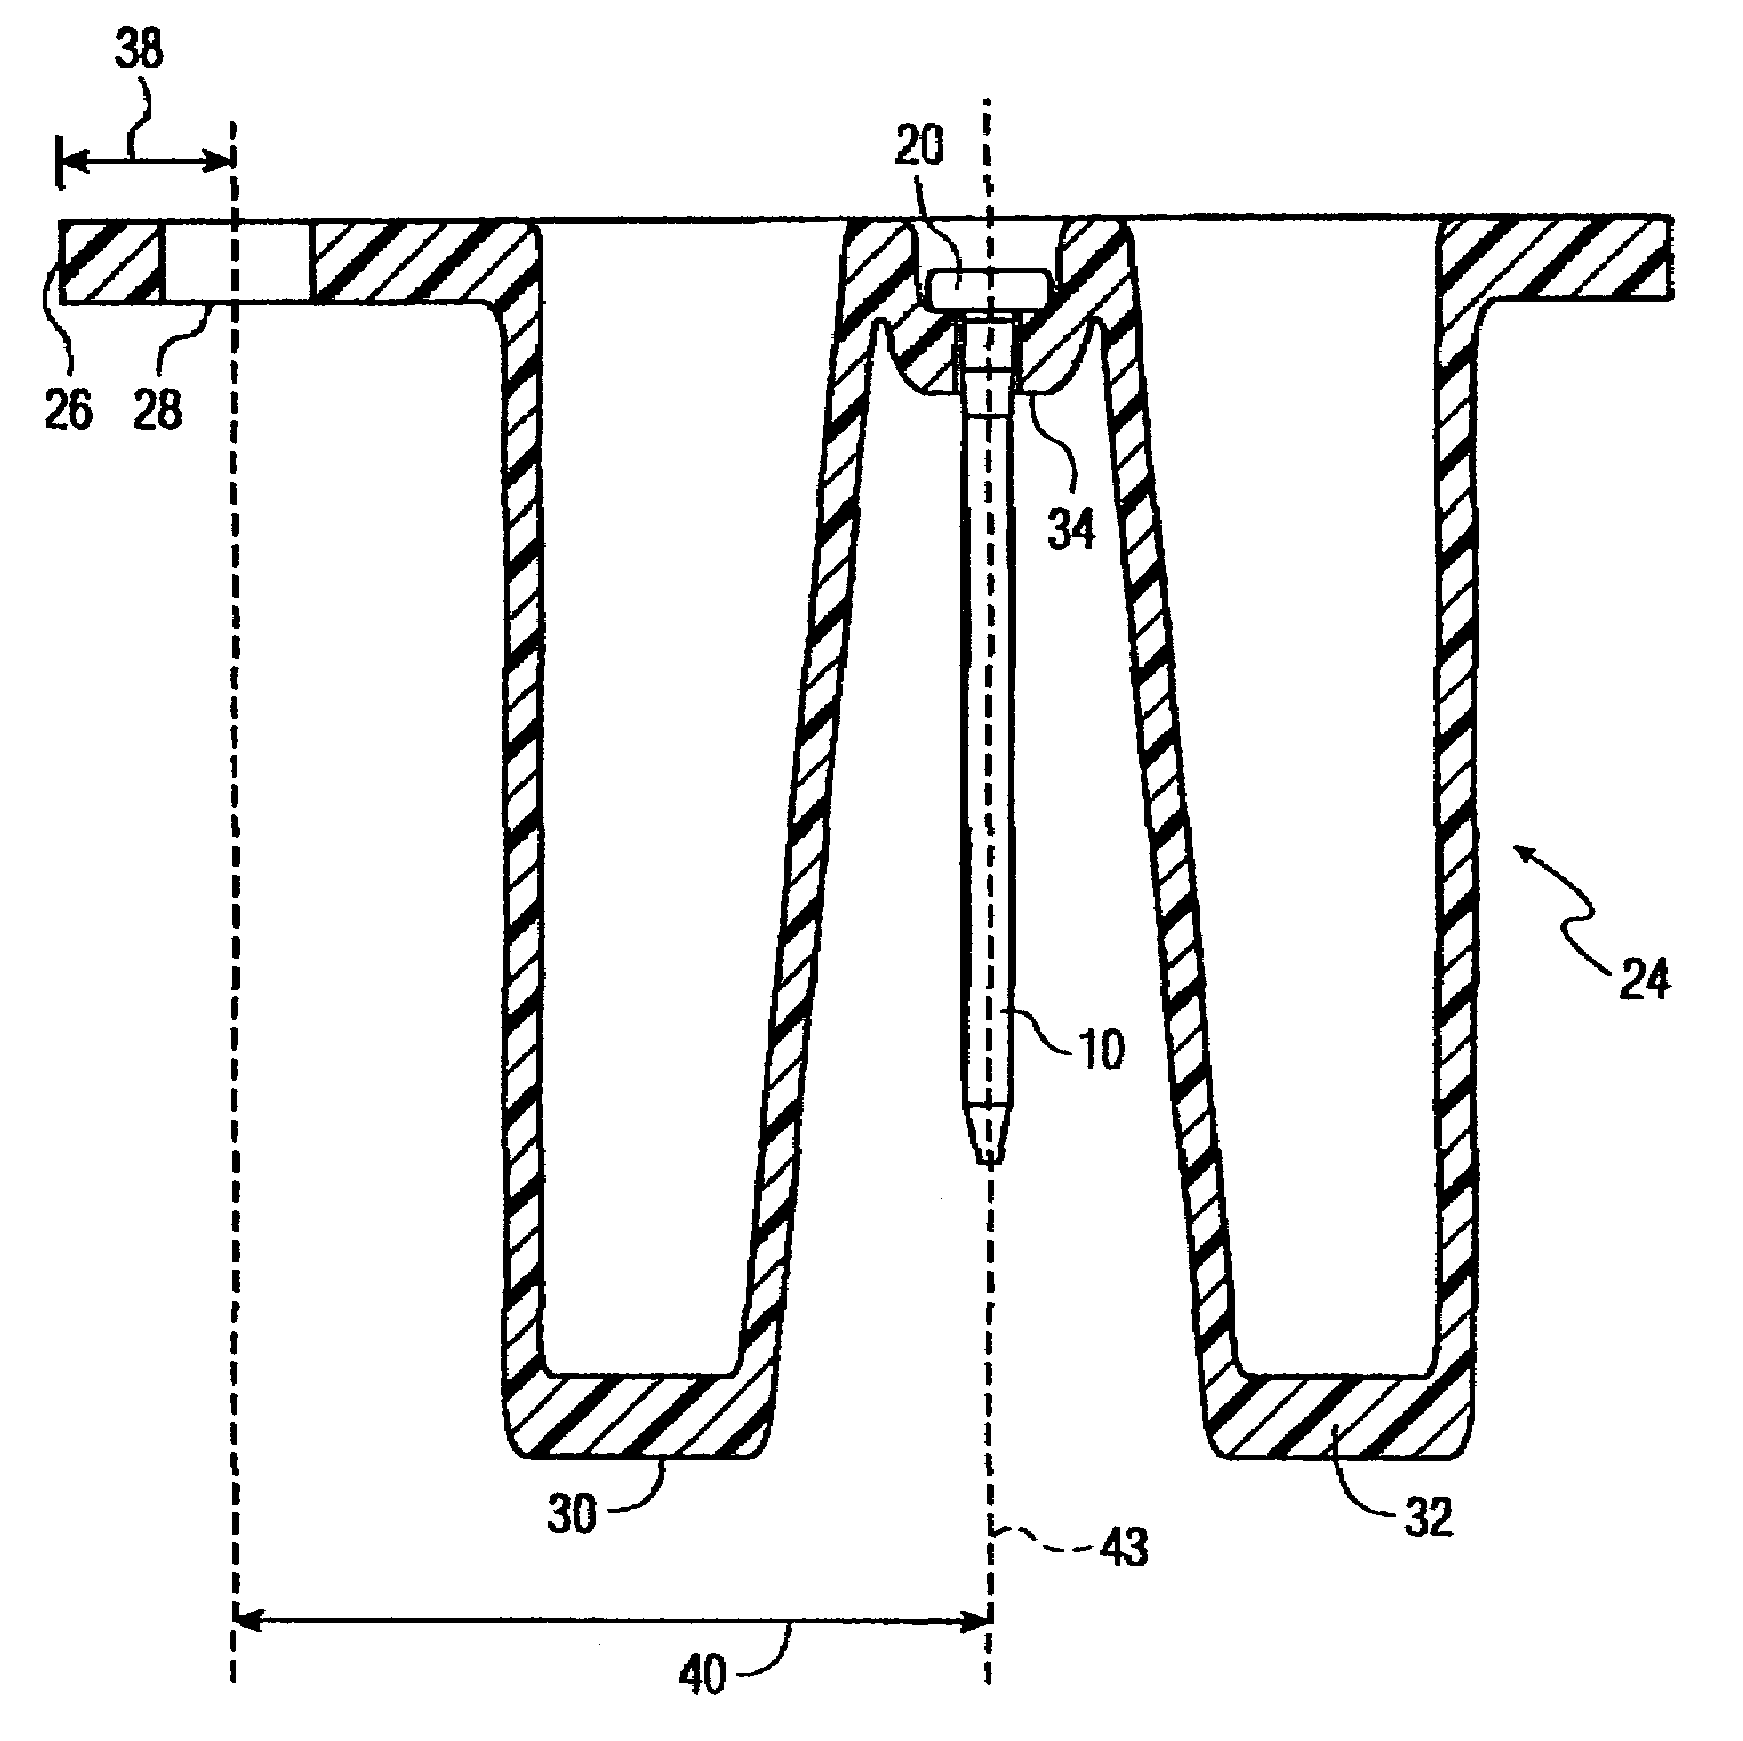 Tape-packaged headed pin contact